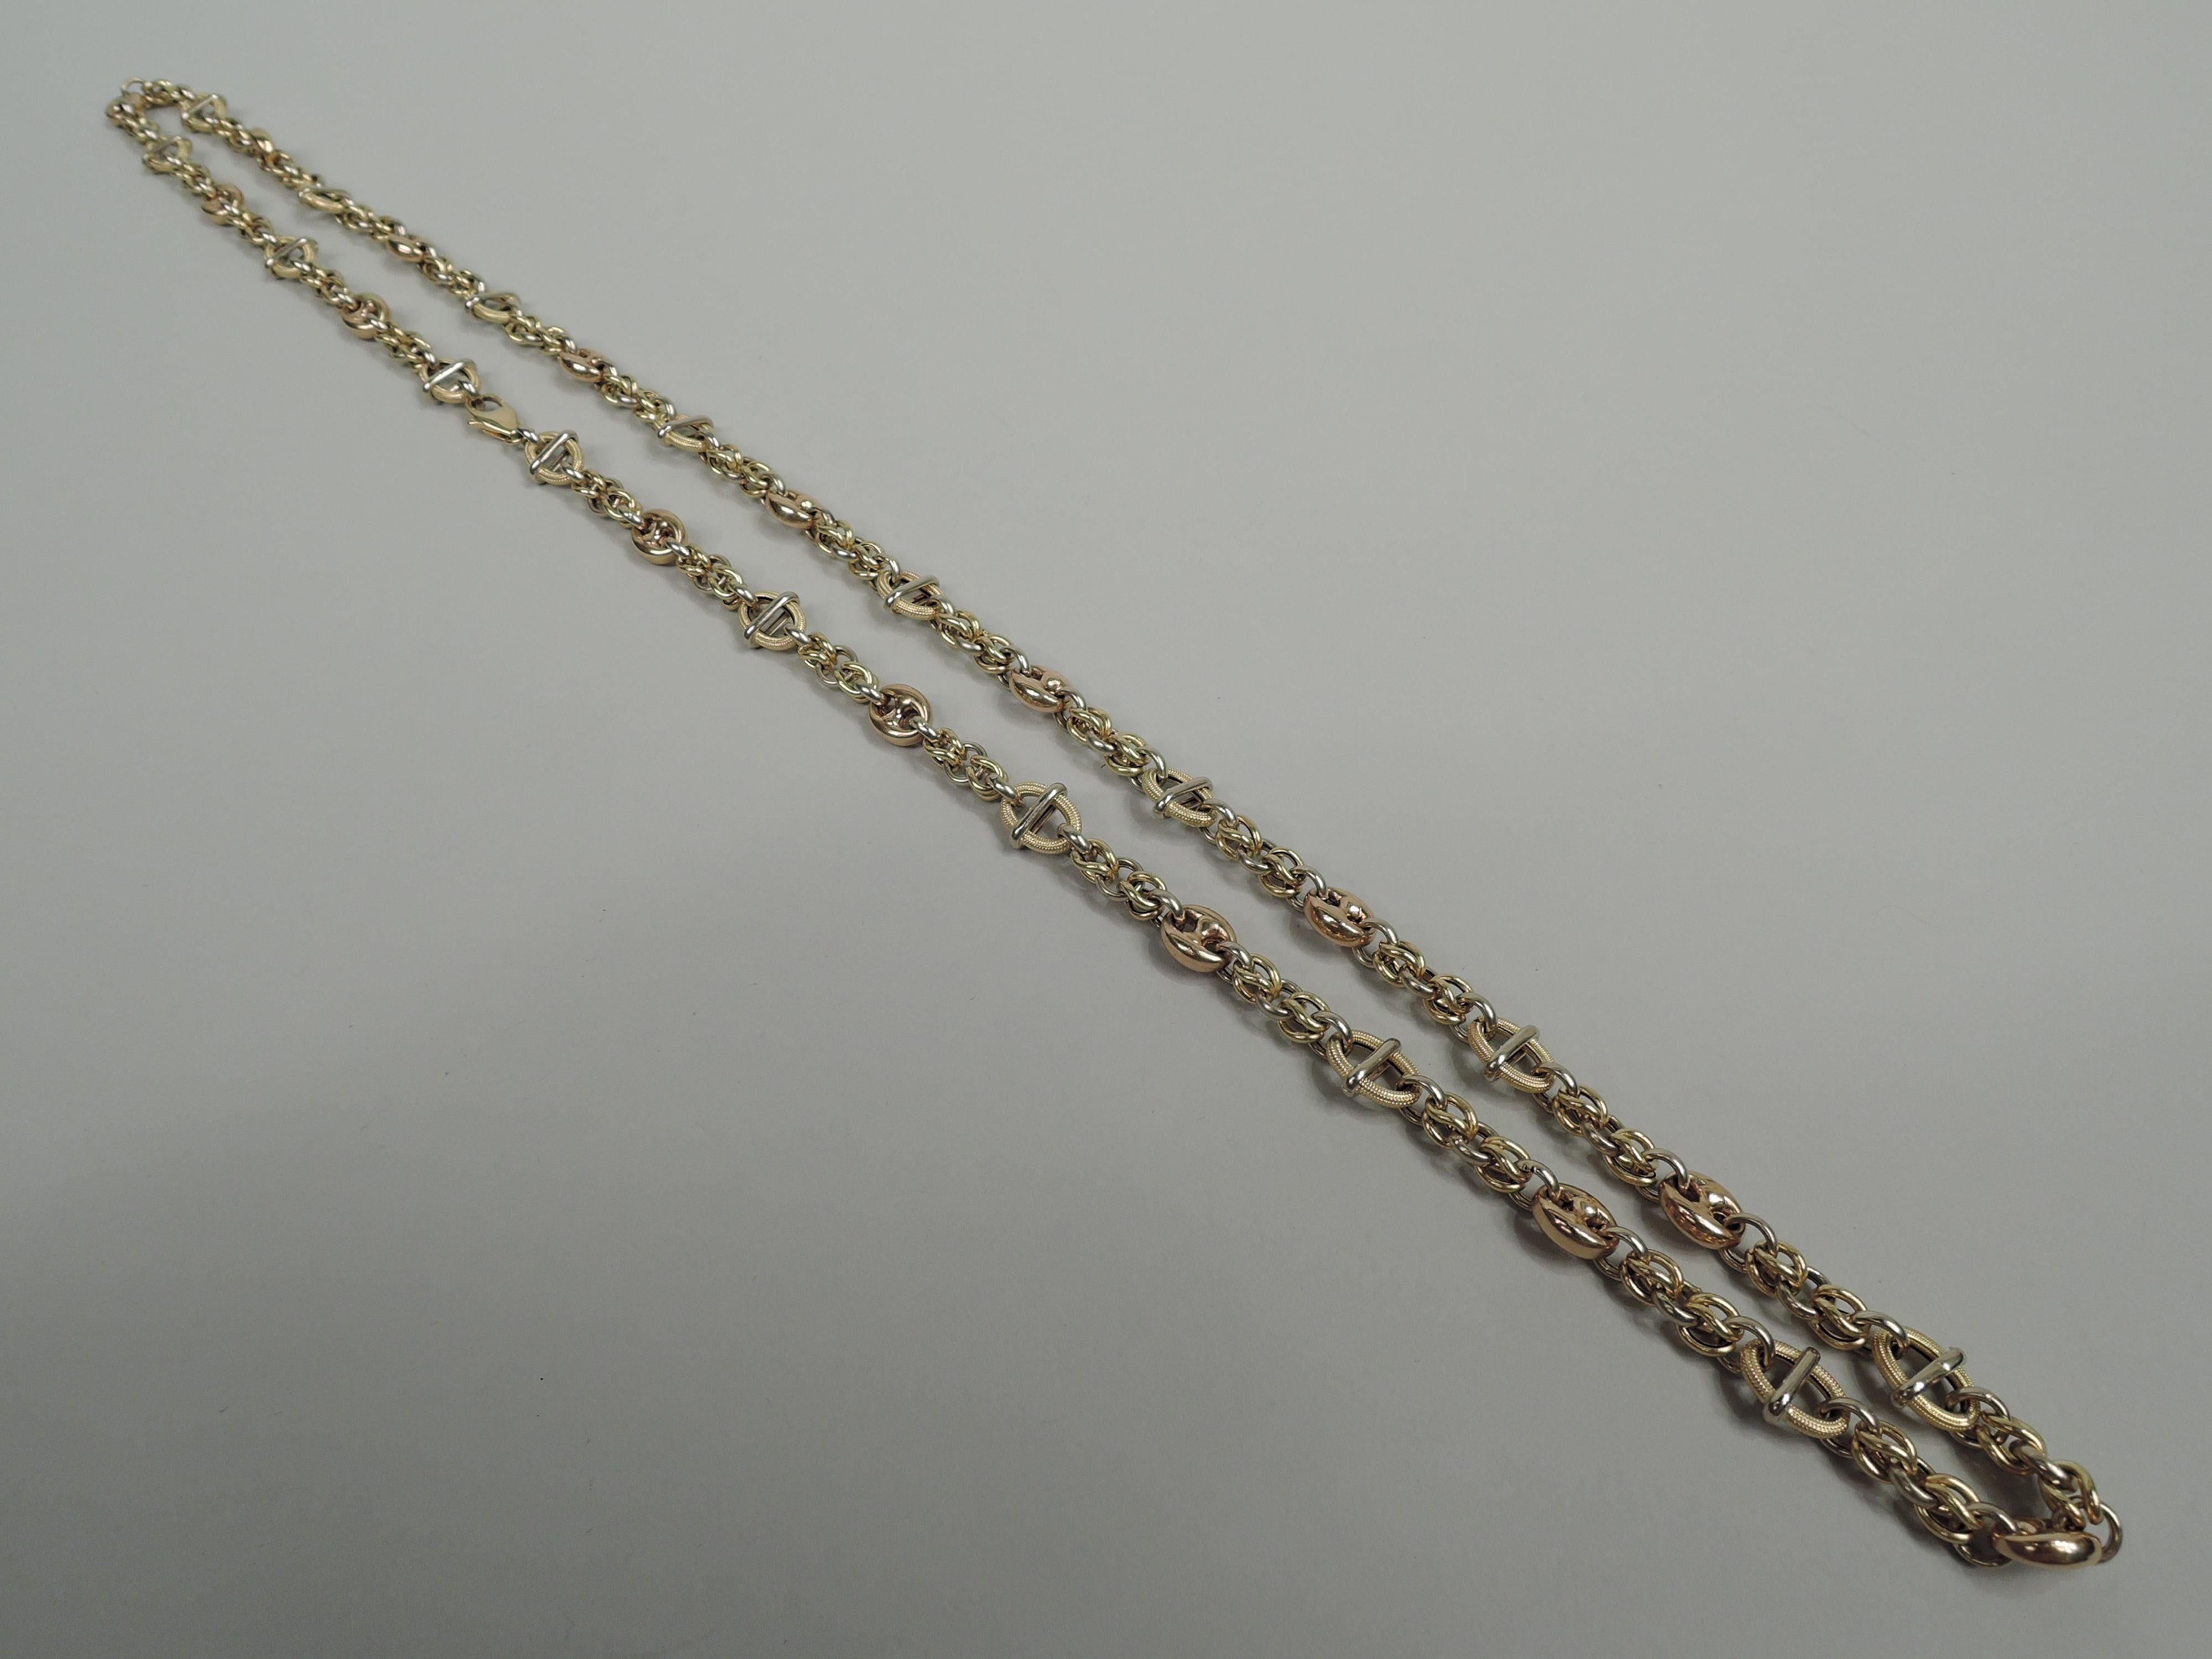 Unusual American Modern 18k gold chain, ca 1980. Small yellow gold links interspersed with large tooled ovals with central wraparound band as well as thick and solid rose ovals. With clasp.